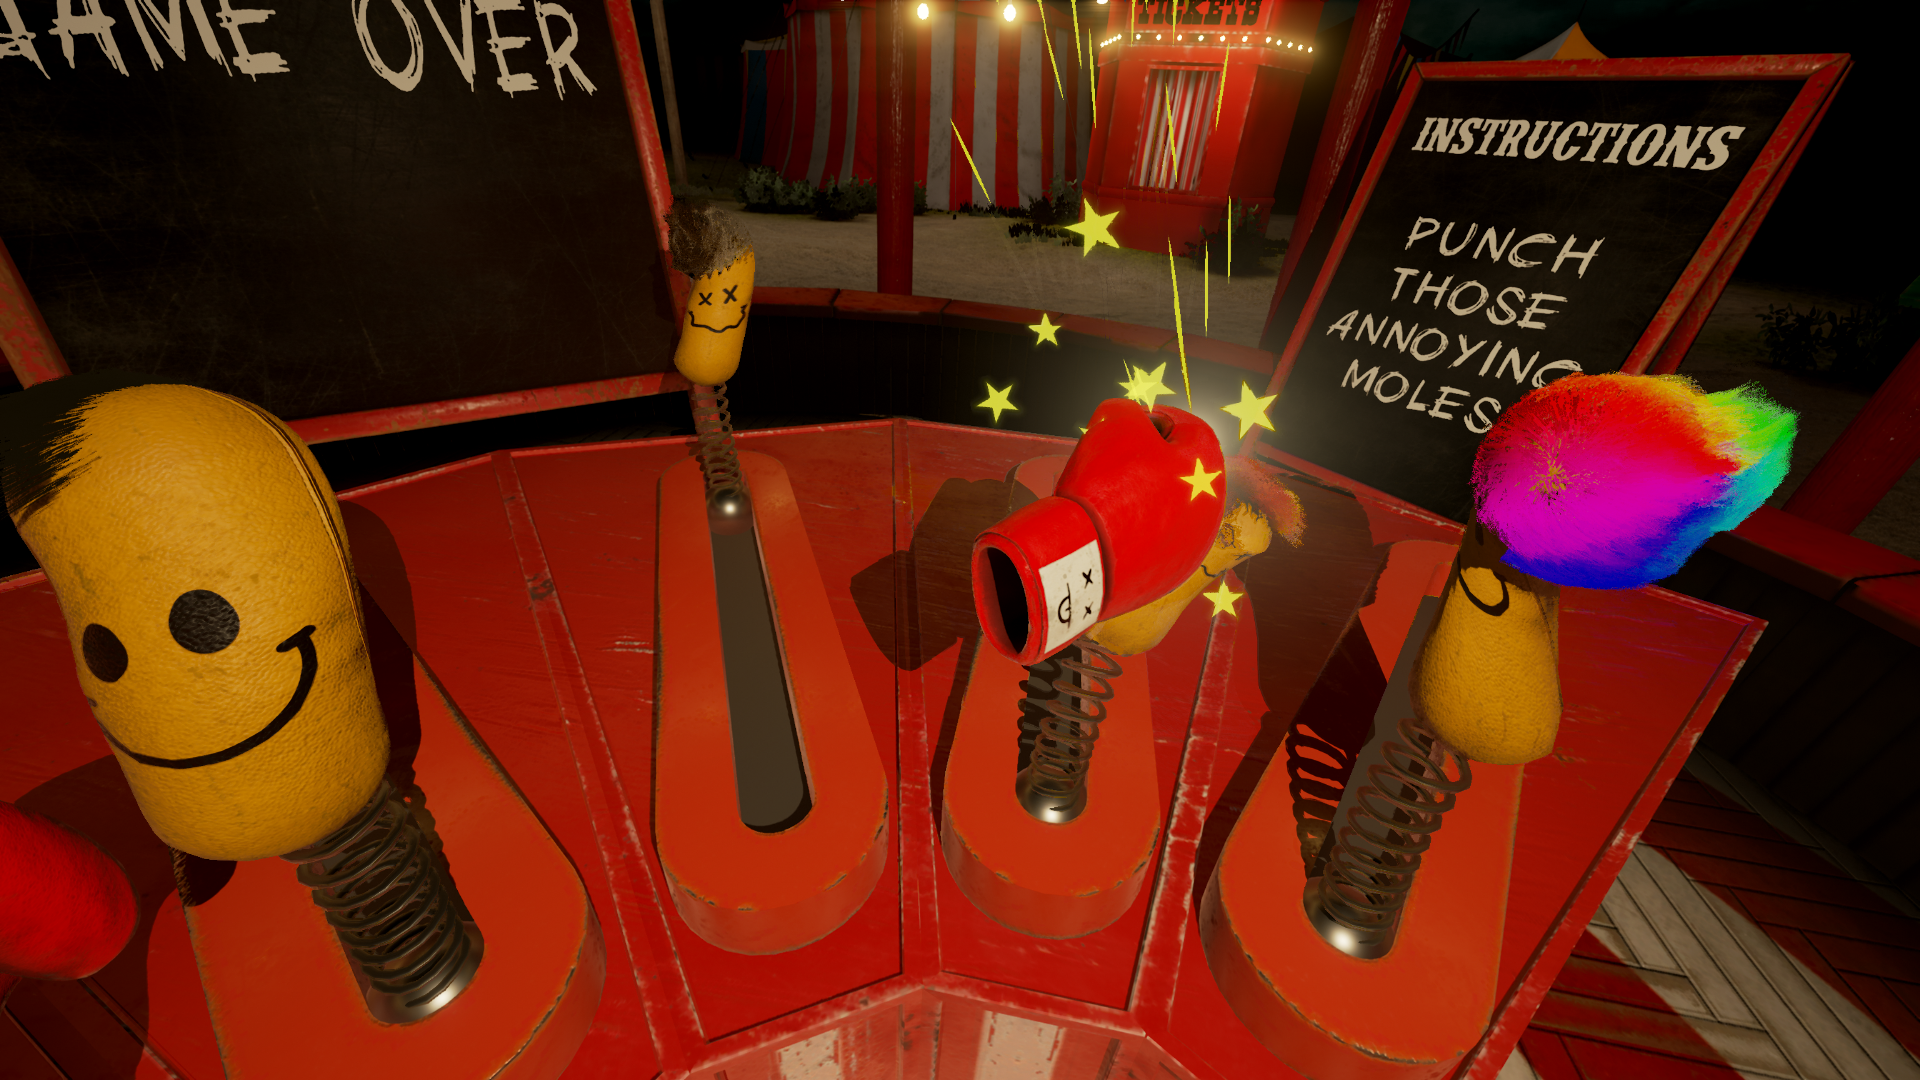 Nvidia Releases Its Own Vr Game Funhouse To The Masses Through